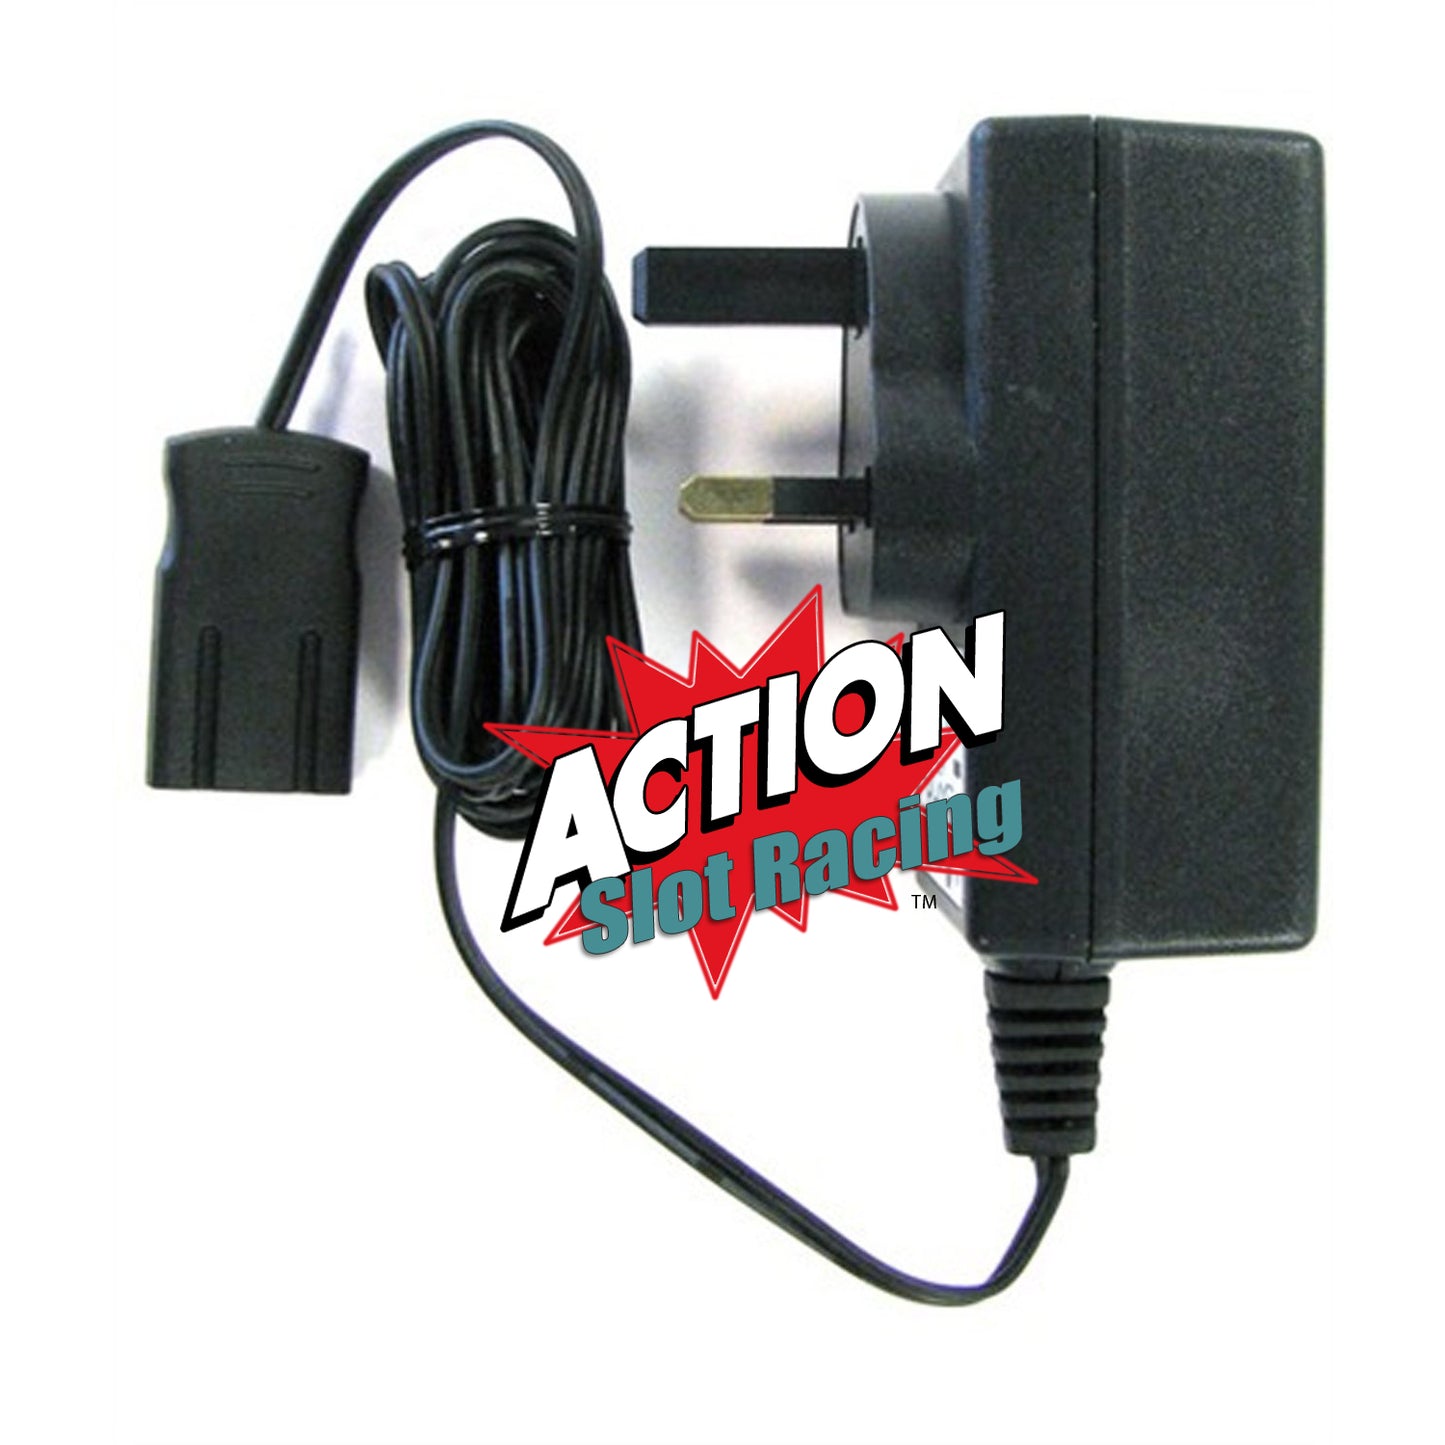 Hornby Scalextric Power Supply - P9400 AC Mains Adaptor - Action Slot Racing